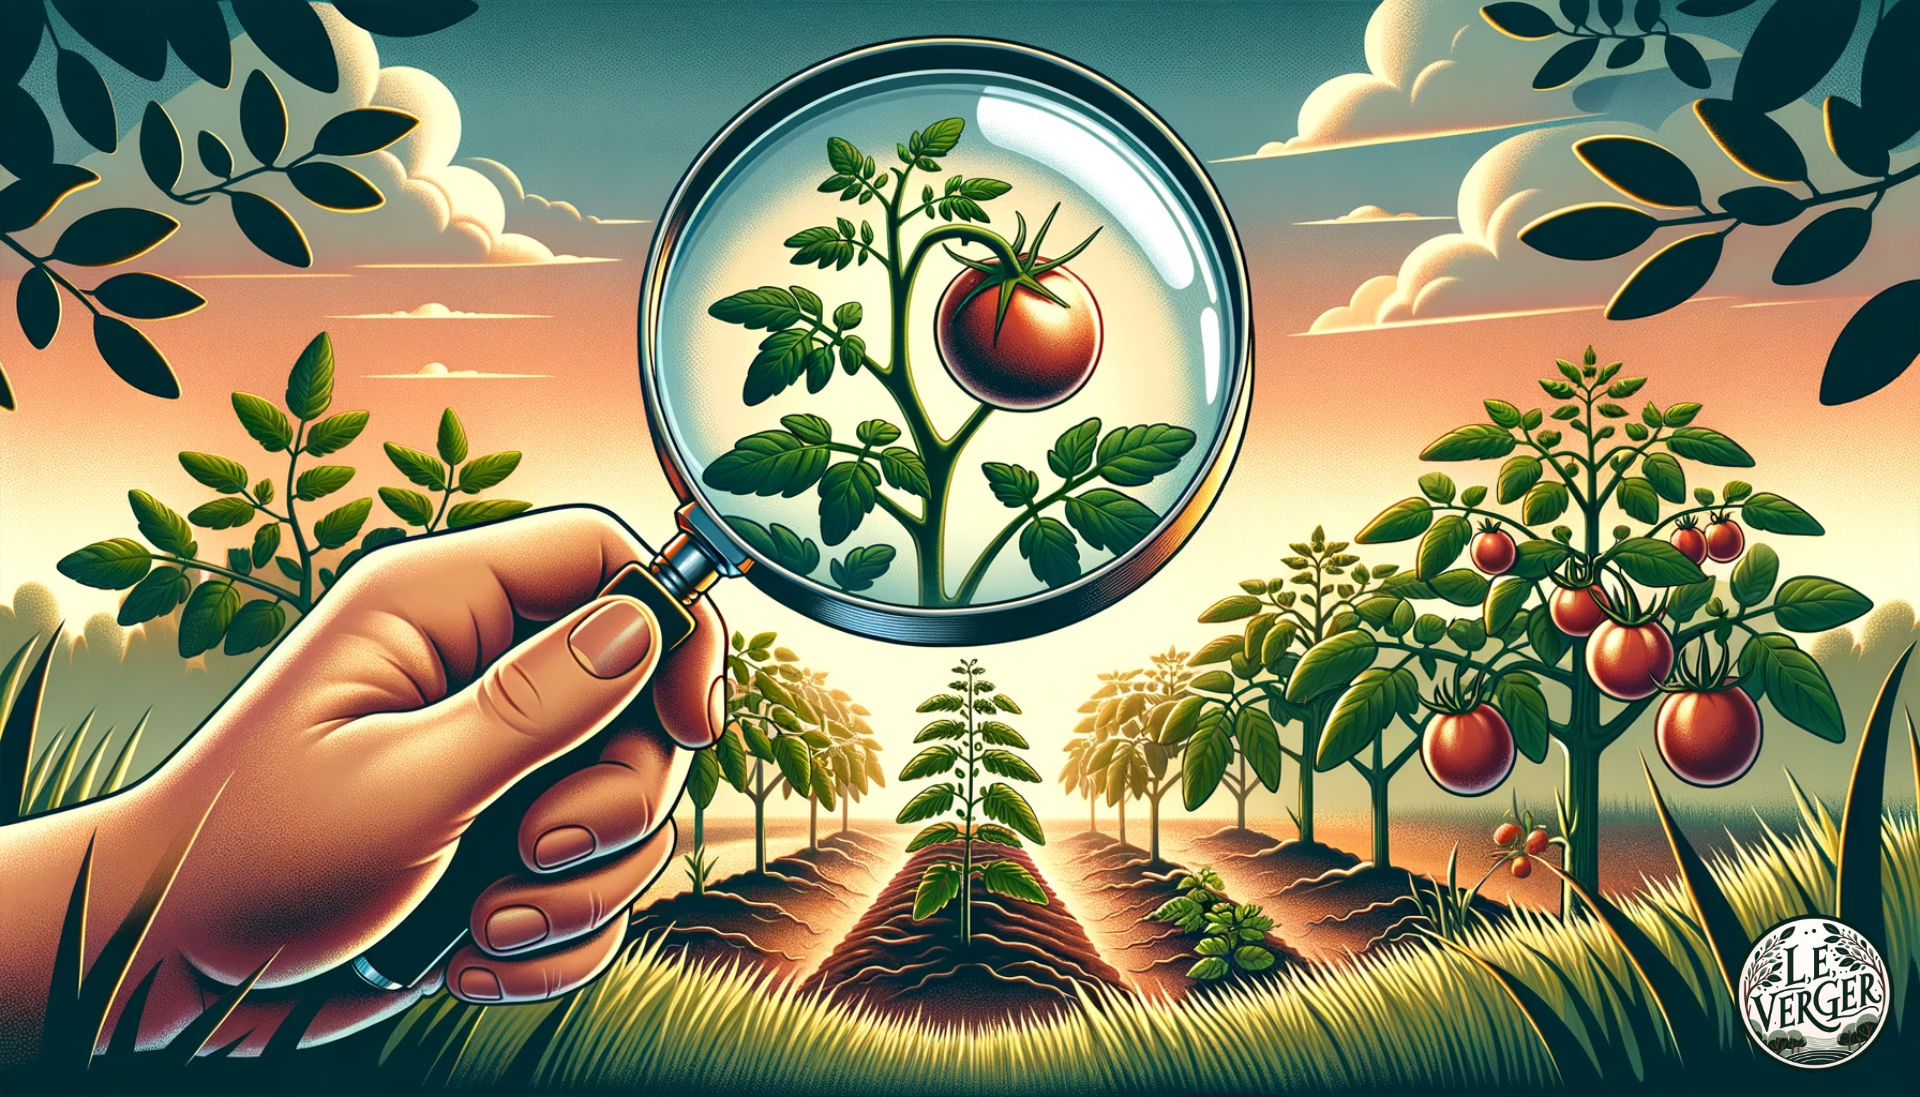 Tomato Tales Illustration - cartoon hand holds magnifying glass up to field of tomato plants at different growth stages.